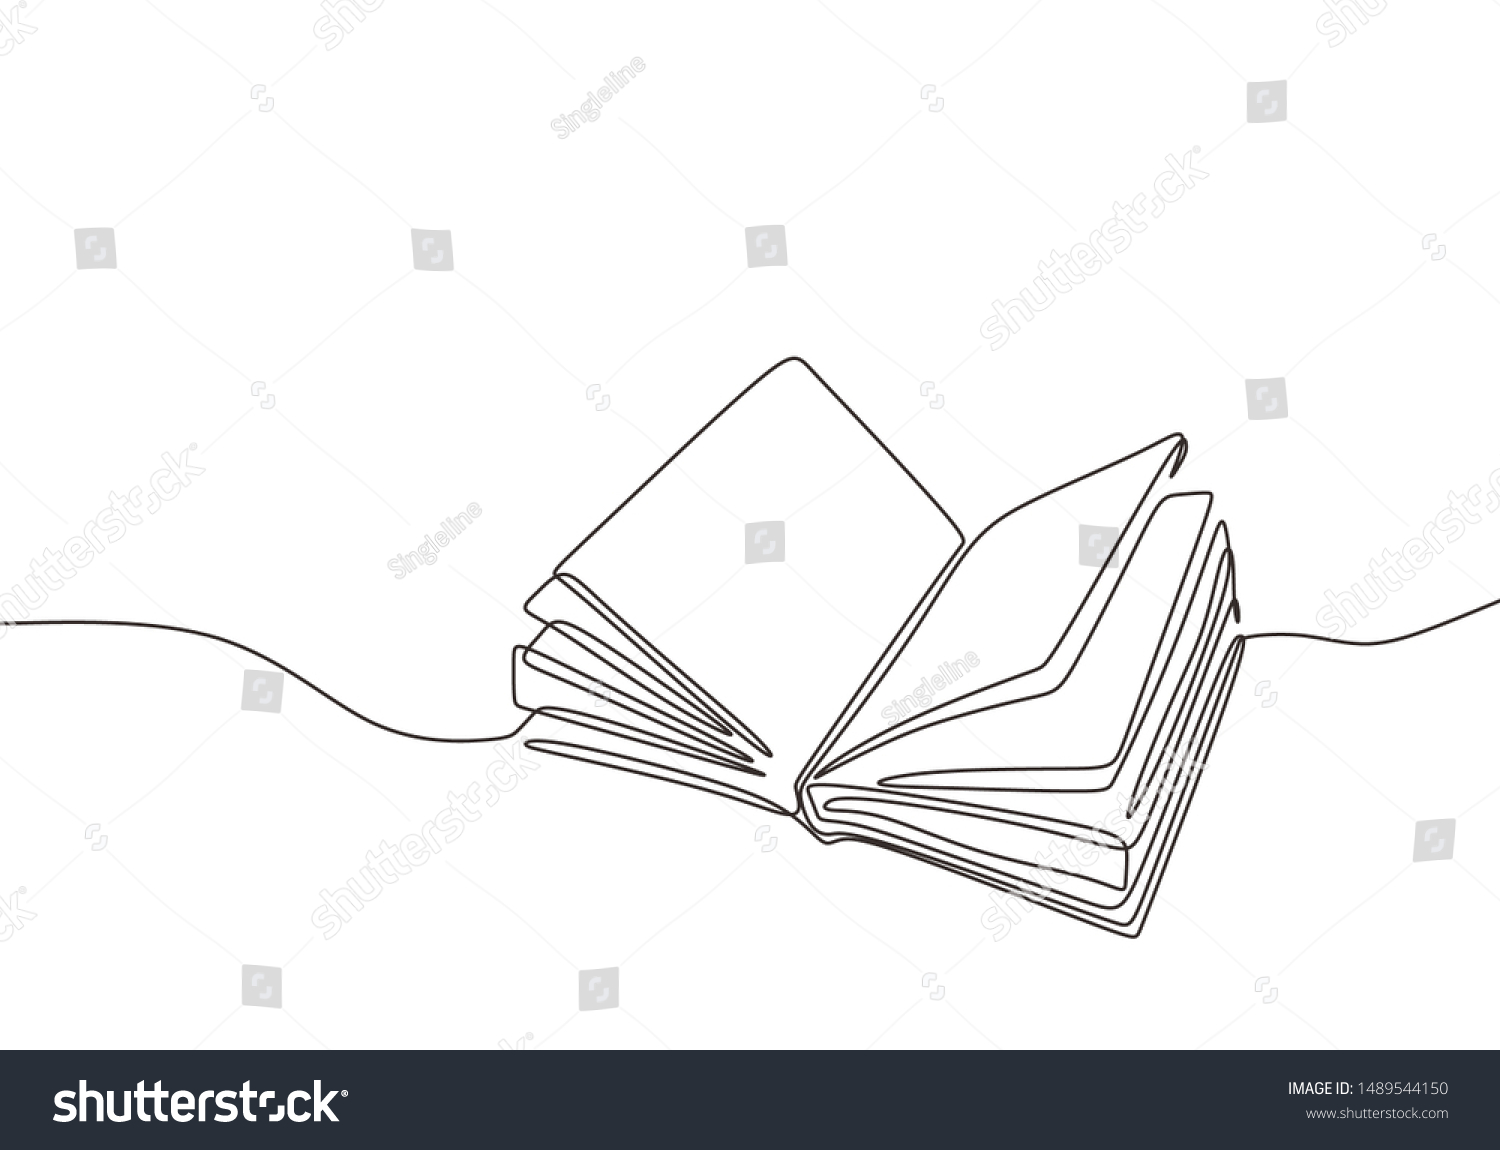 Continuous one line drawing open book with flying pages. Vector illustration education supplies back to school theme. #1489544150